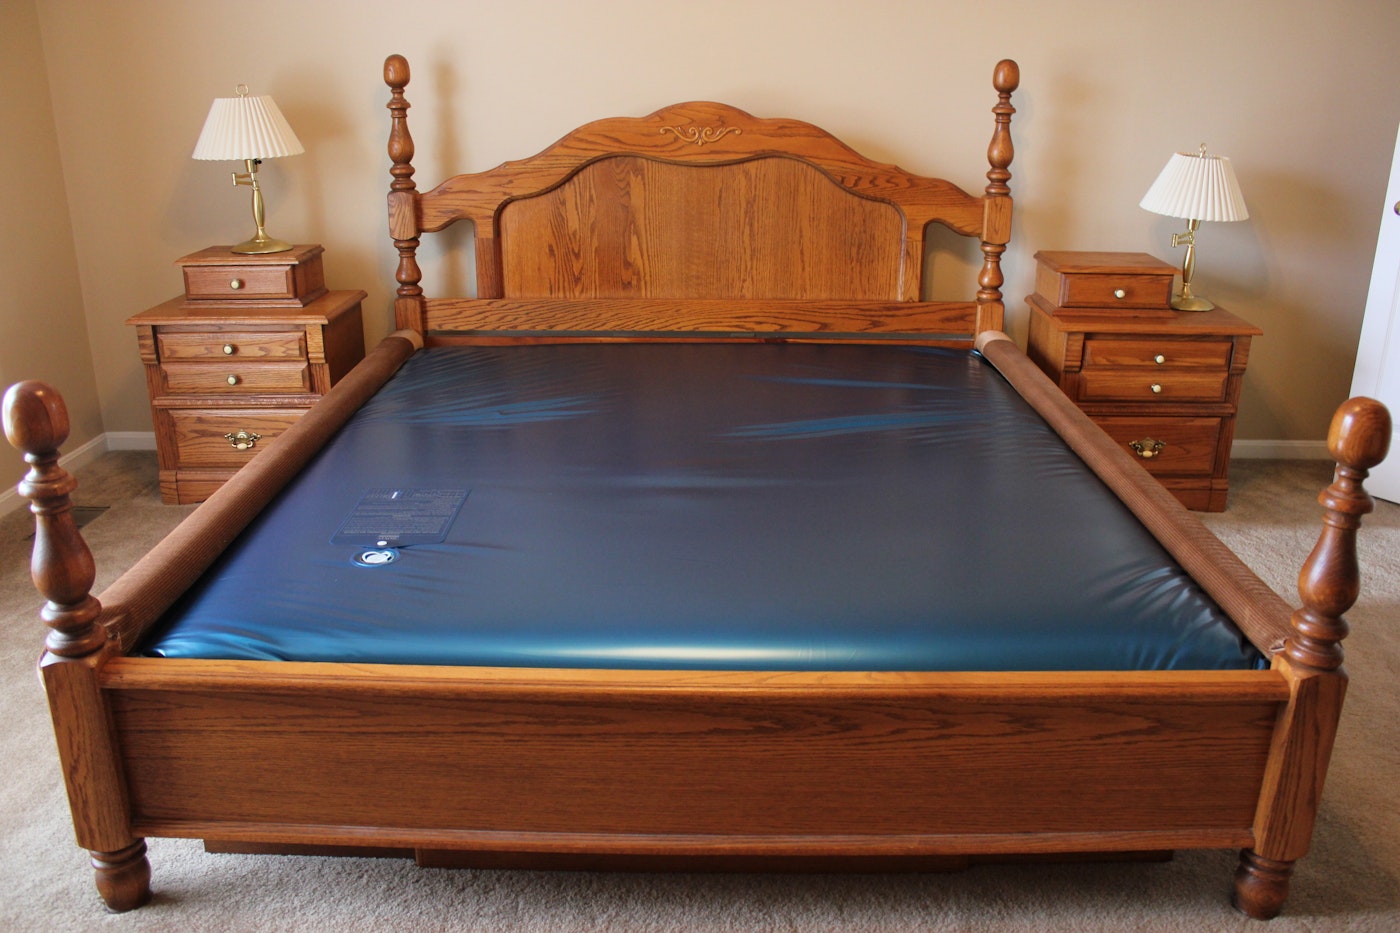 king size waterbed mattress bolsters